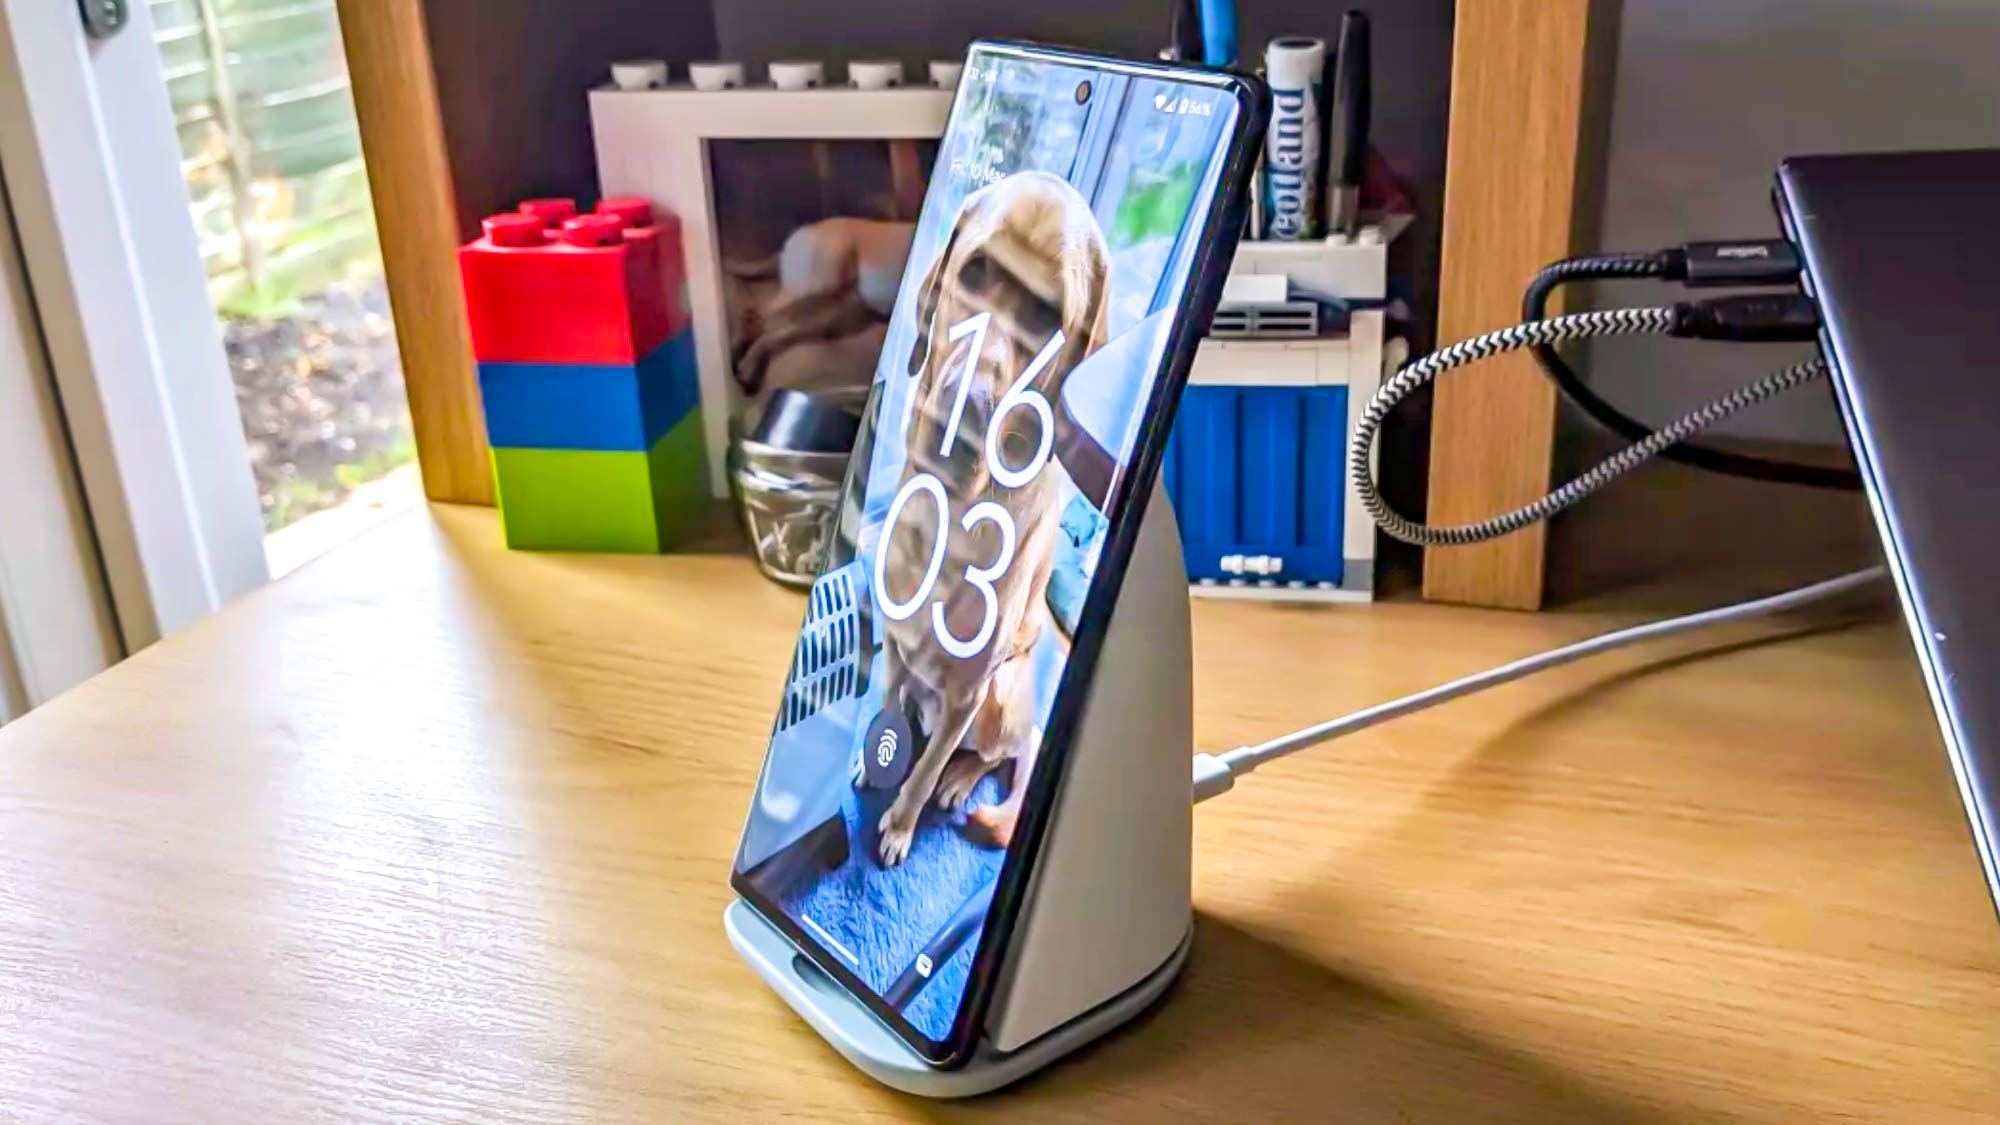 Google Pixel Stand (2nd gen) review: Power with finesse